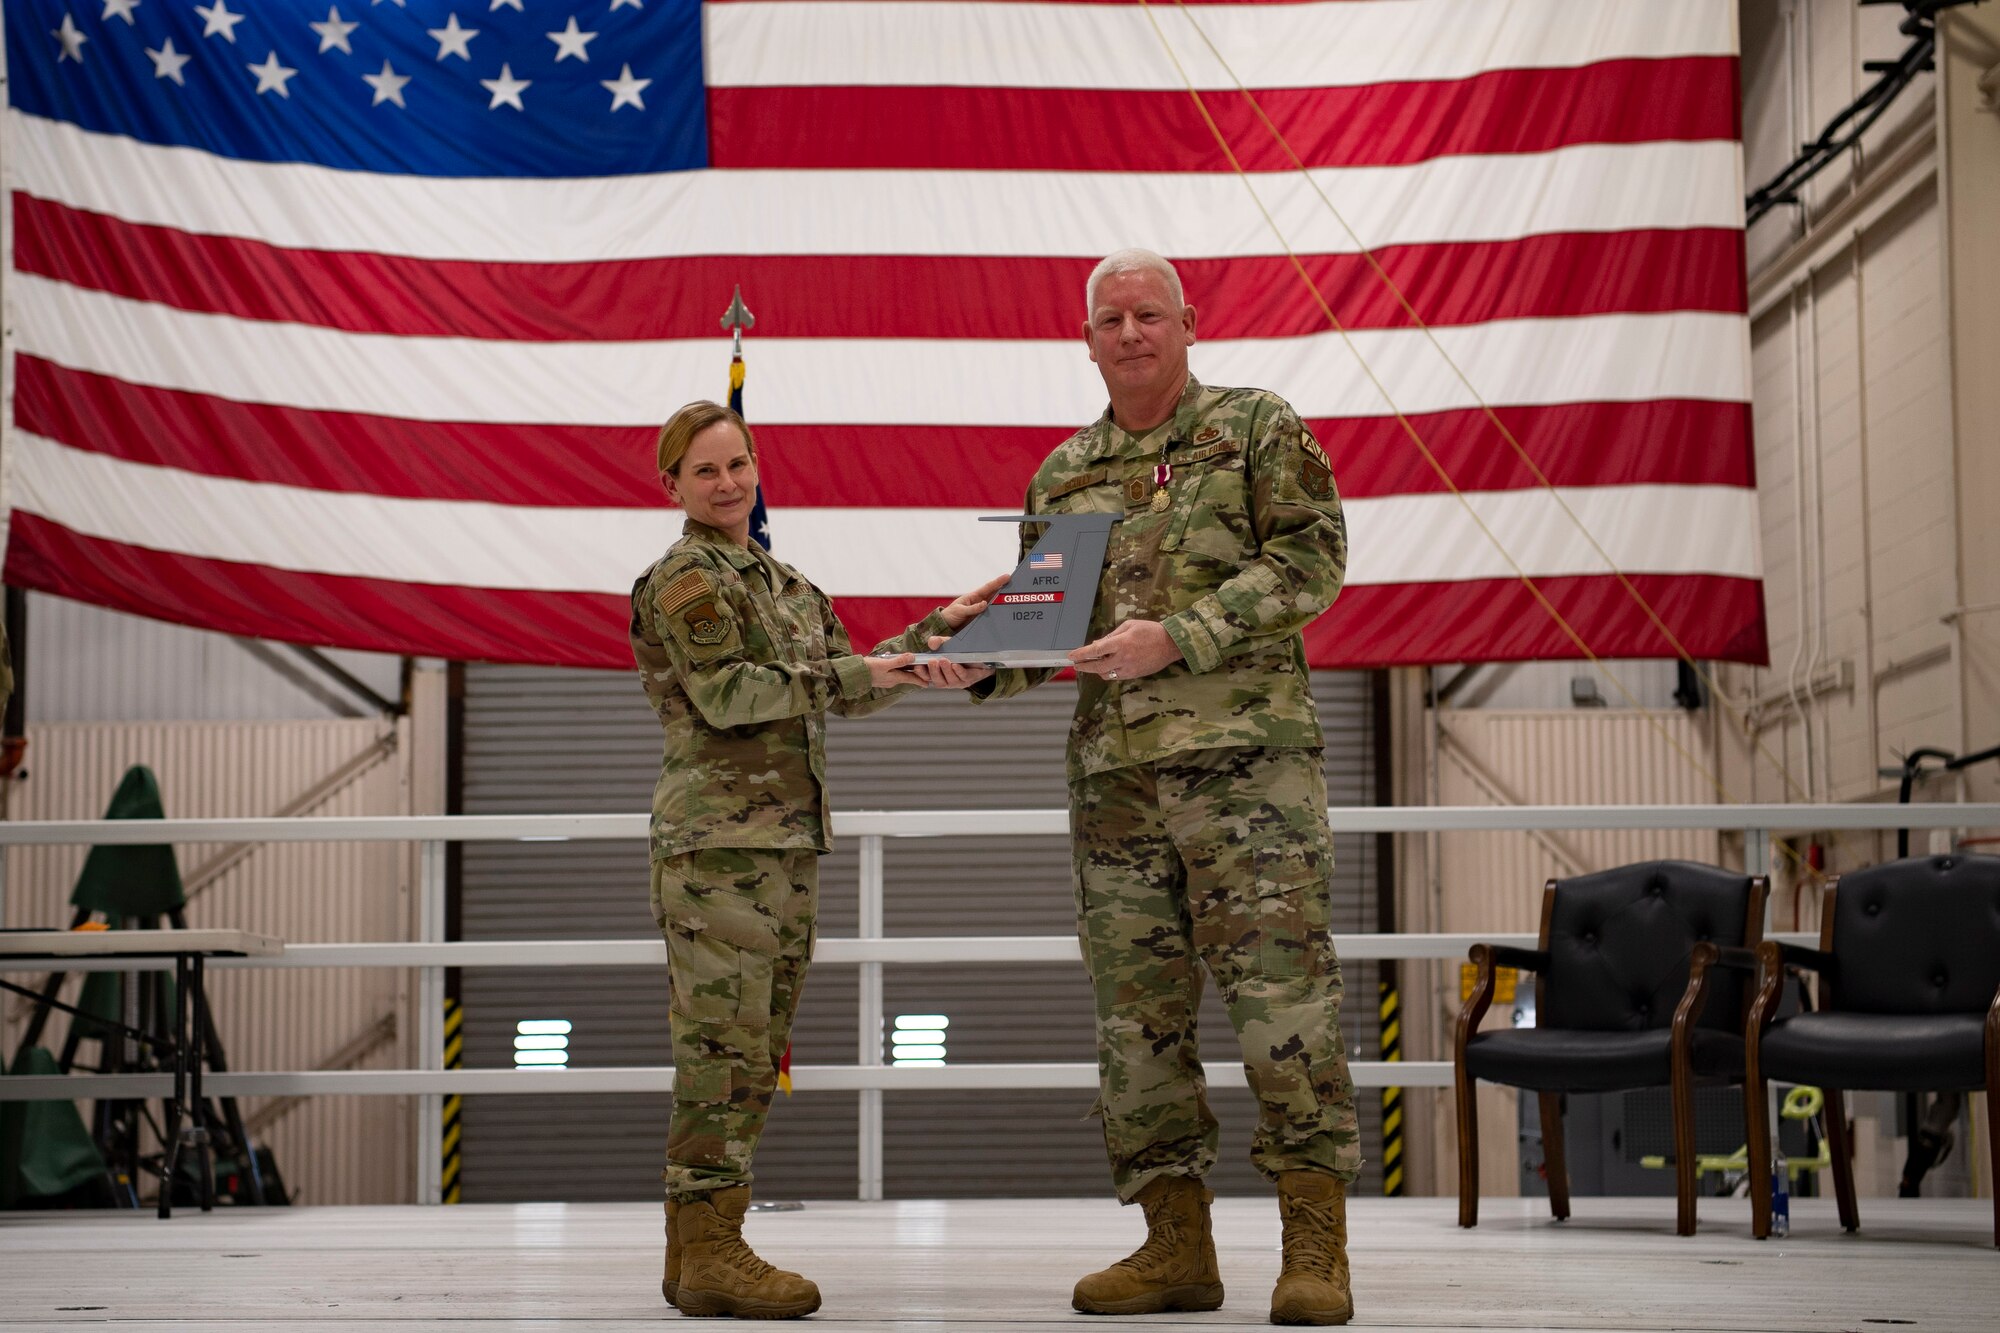 Chief Master Sgt. Richard Scully, 434th Aircraft Maintenance Squadron, maintenance superintendent receives a tail flash from Col. Arianne Mayberry, 434th Maintenance Group, commander at Grissom Air Reserve Base, IN on 6 February, 2022. Chief Scully is retiring after more than 35 years of service, all of which were spent at Grissom. Scully enlisted as open electronics, and became an avionics instrument specialist, now known as guidance and control. In 1994, he spent some time in the military personnel flight, working in customer service, before becoming a quality assurance inspector in AMXS.